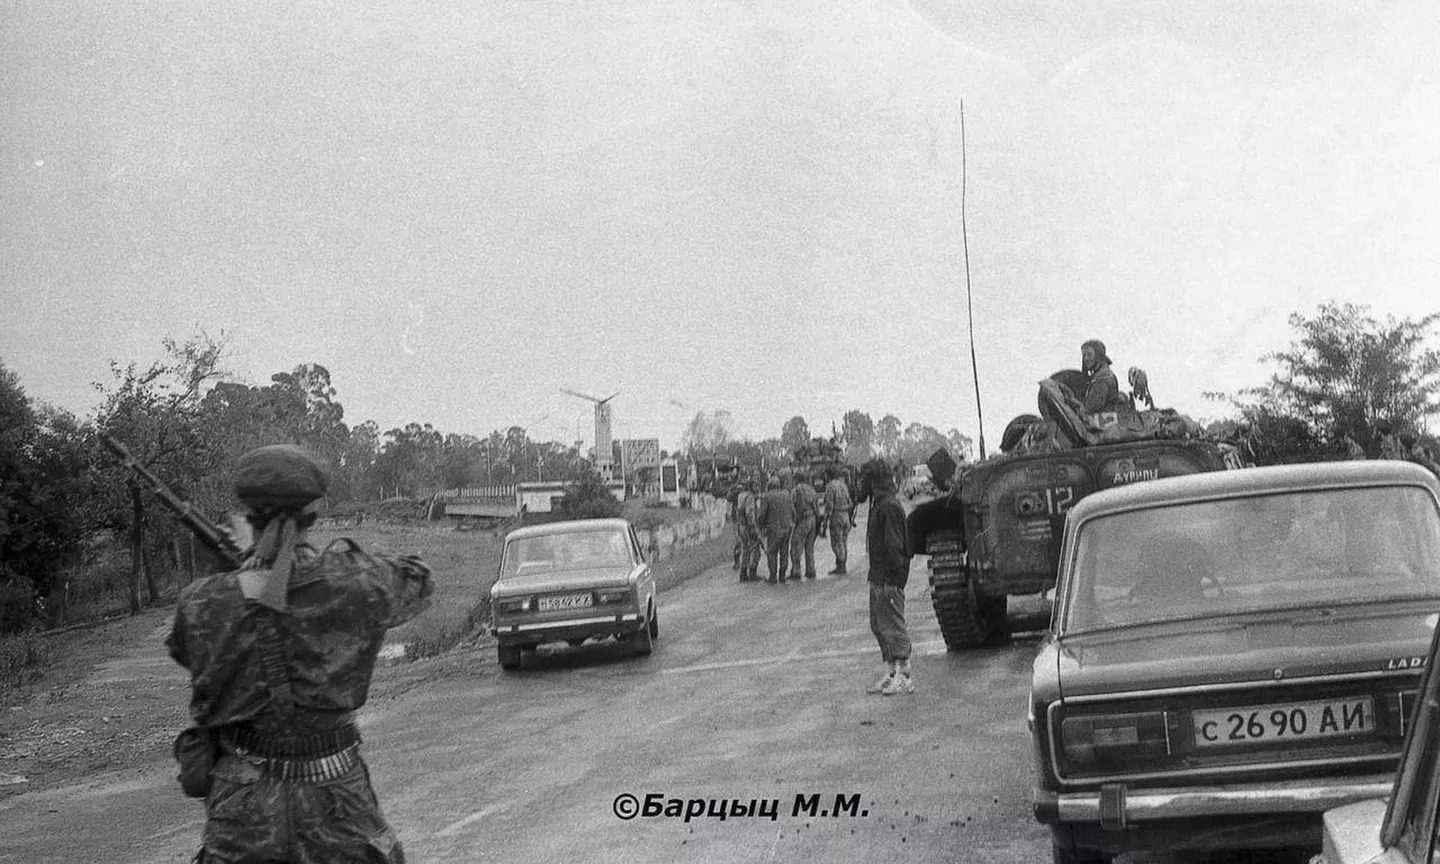 The blockade of the Tqwarchal and Ochamchira regions, which had continued throughout the war, was lifted.